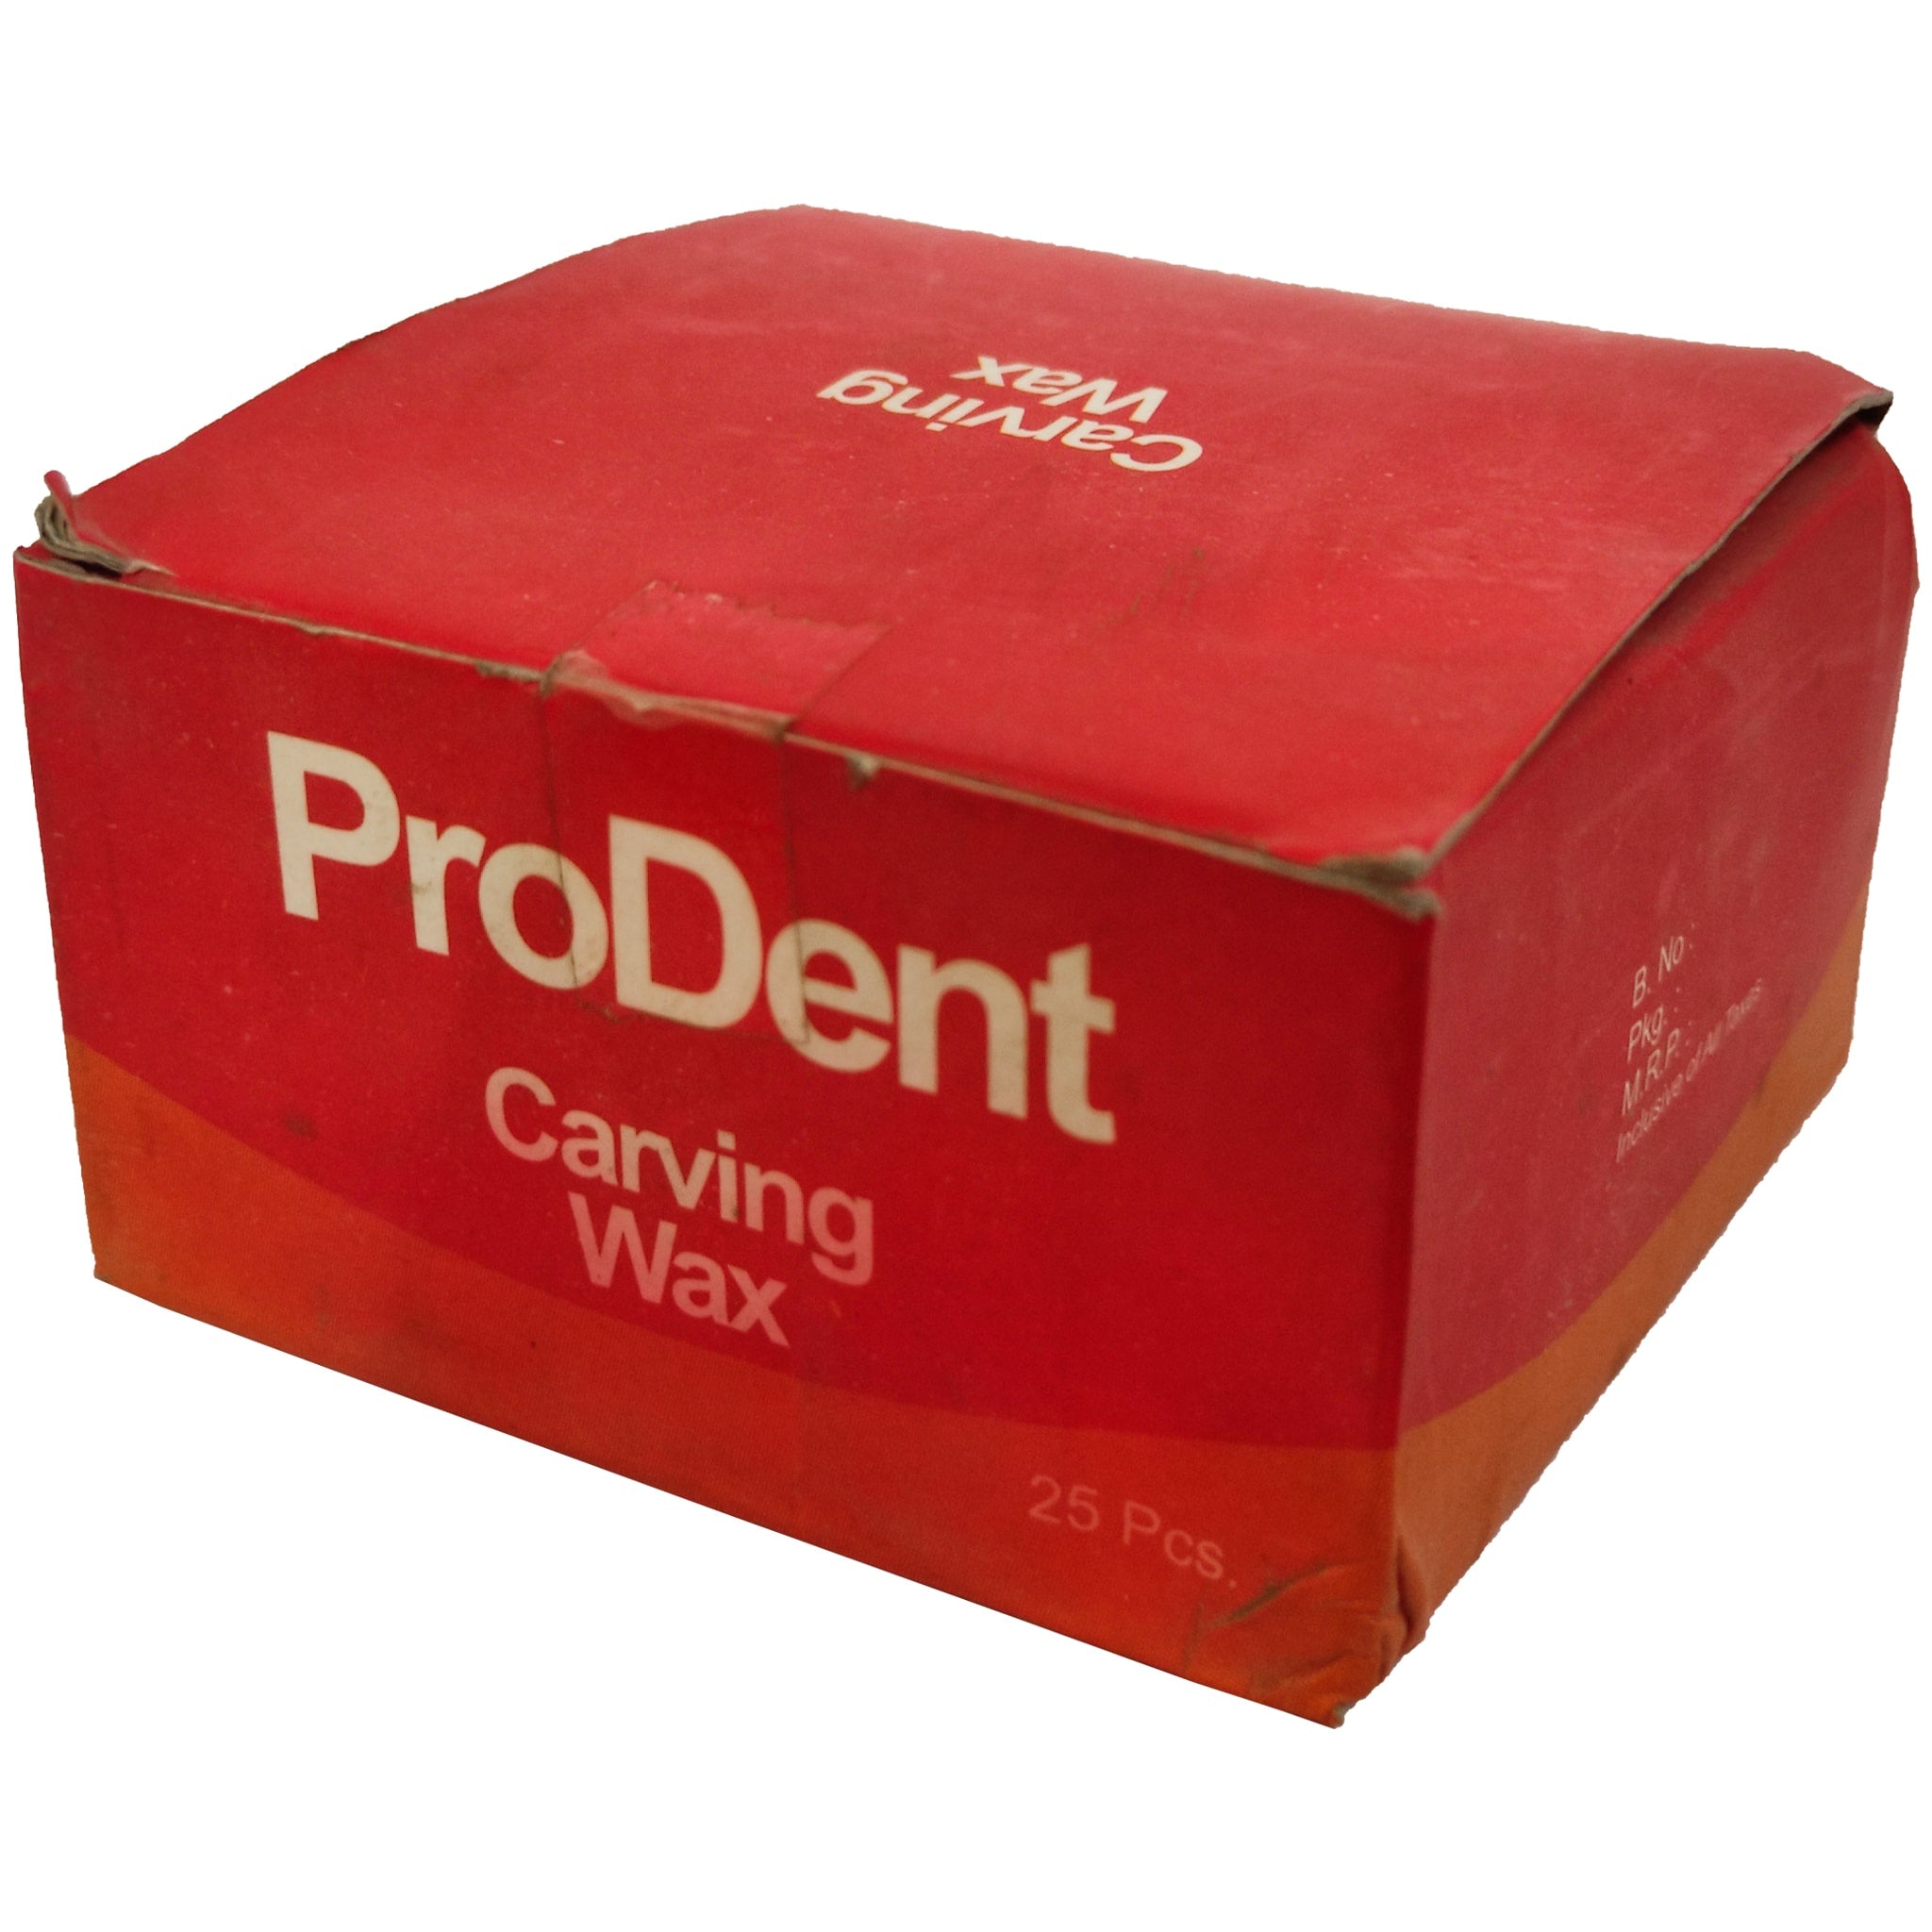 ProDent Carving Wax